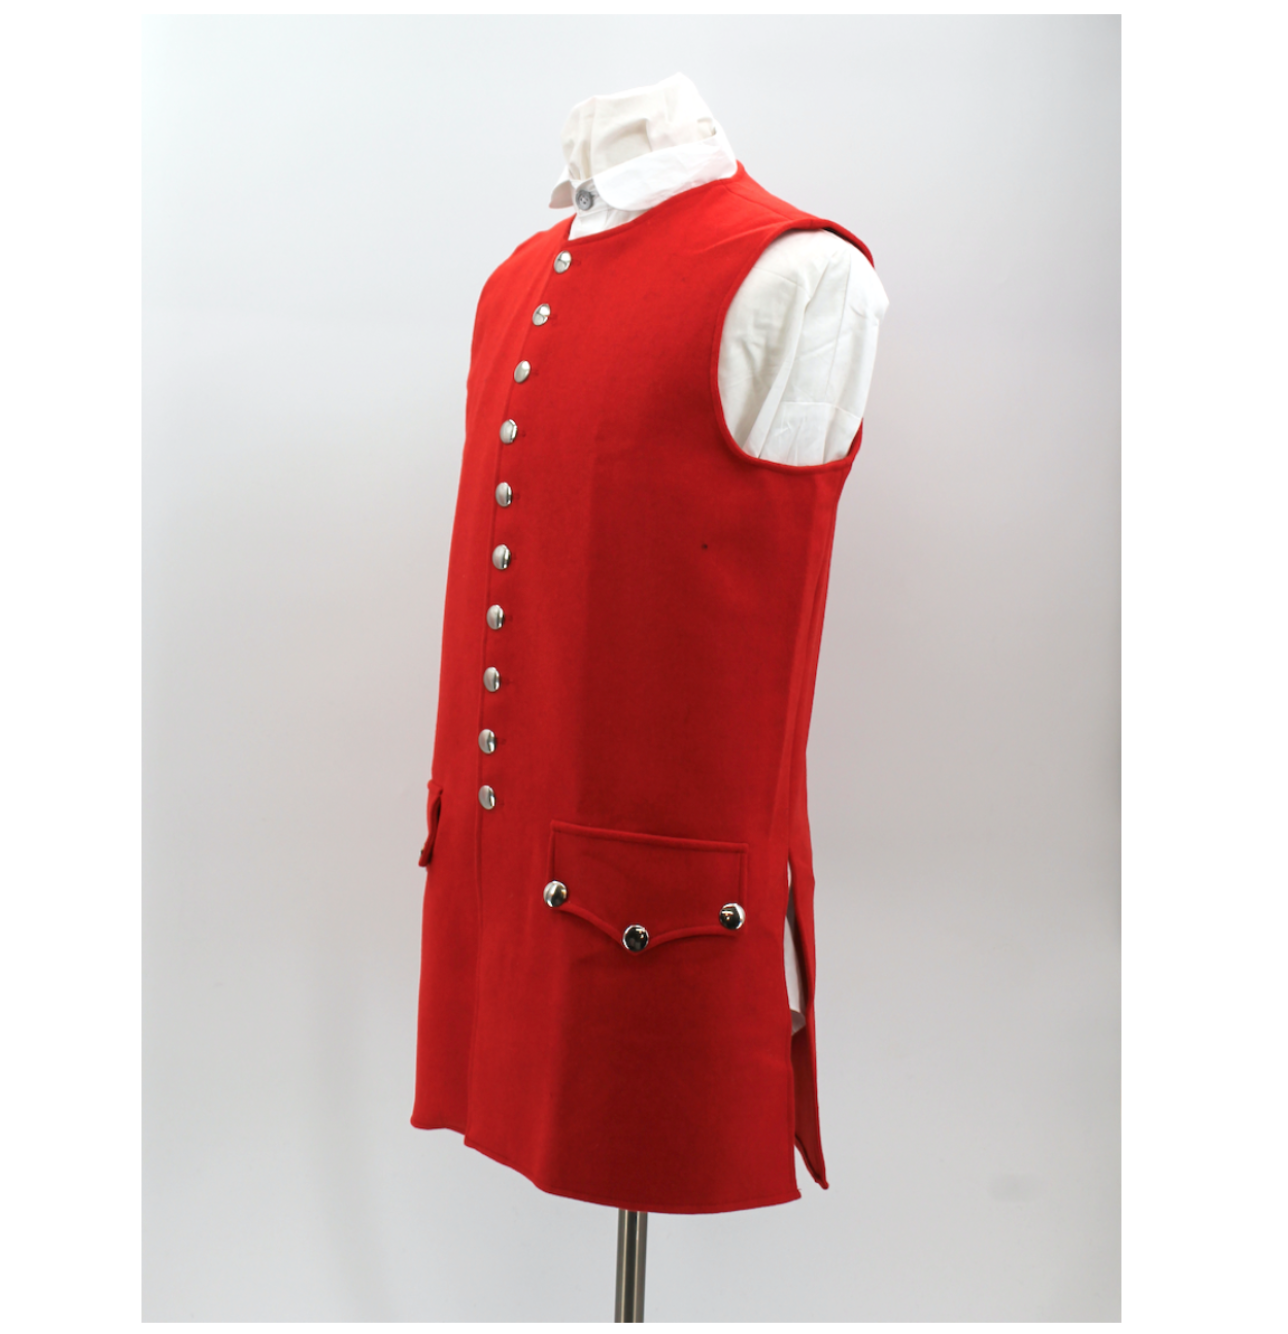 17th century Red Wool Waistcoat for Reenactments